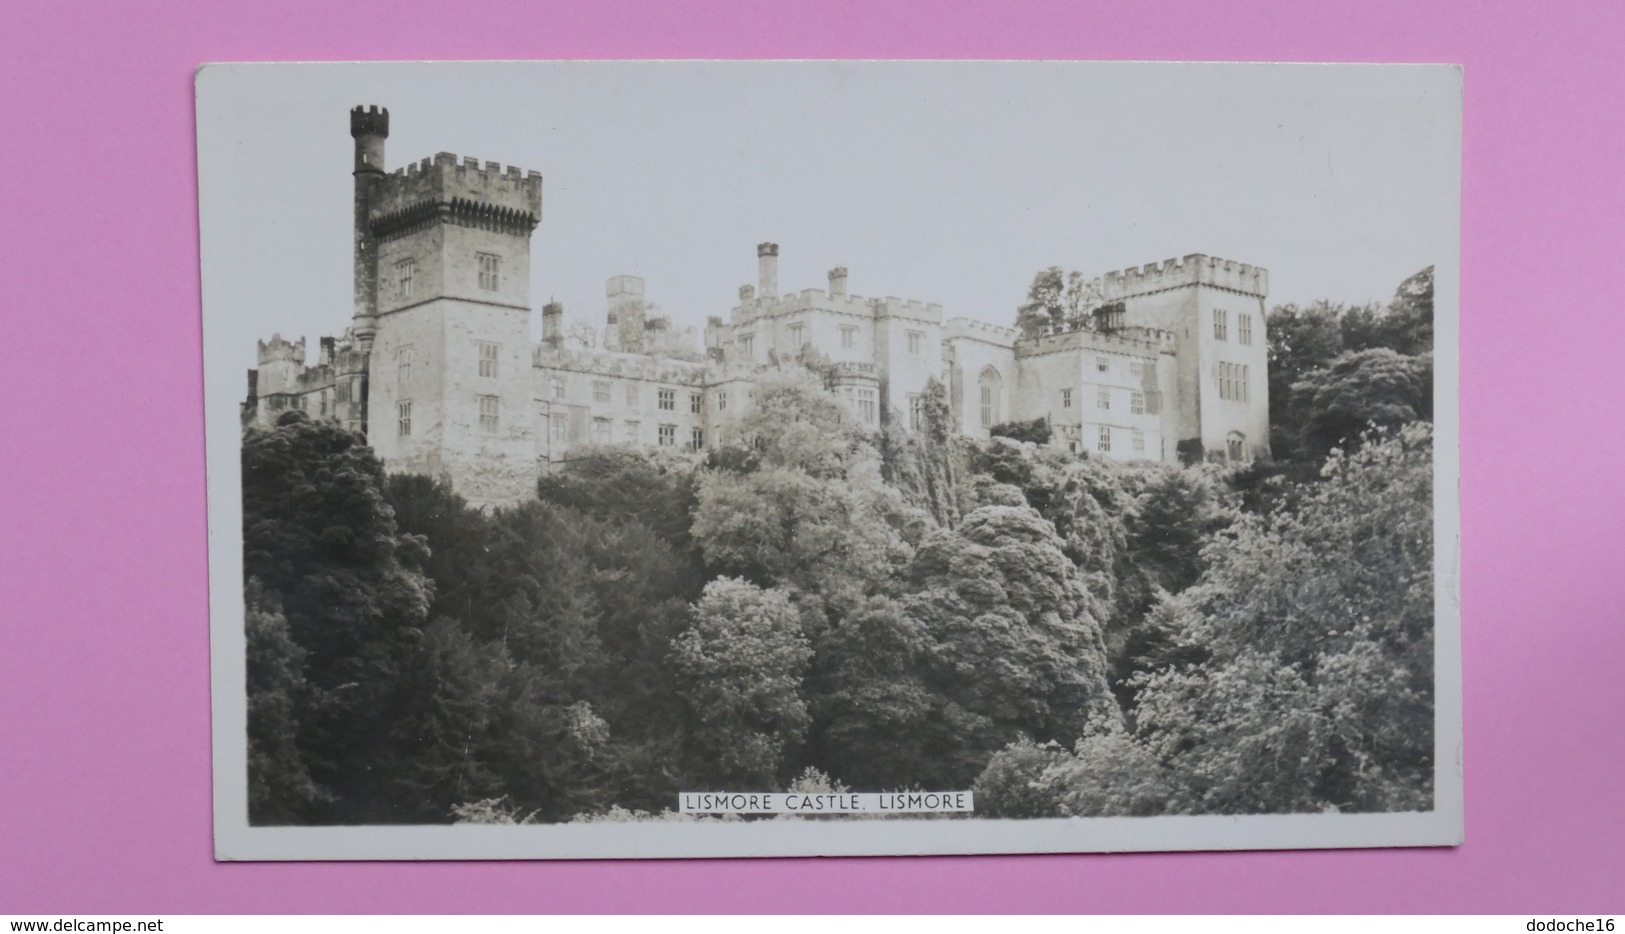 LISMORE CASTLE - Waterford